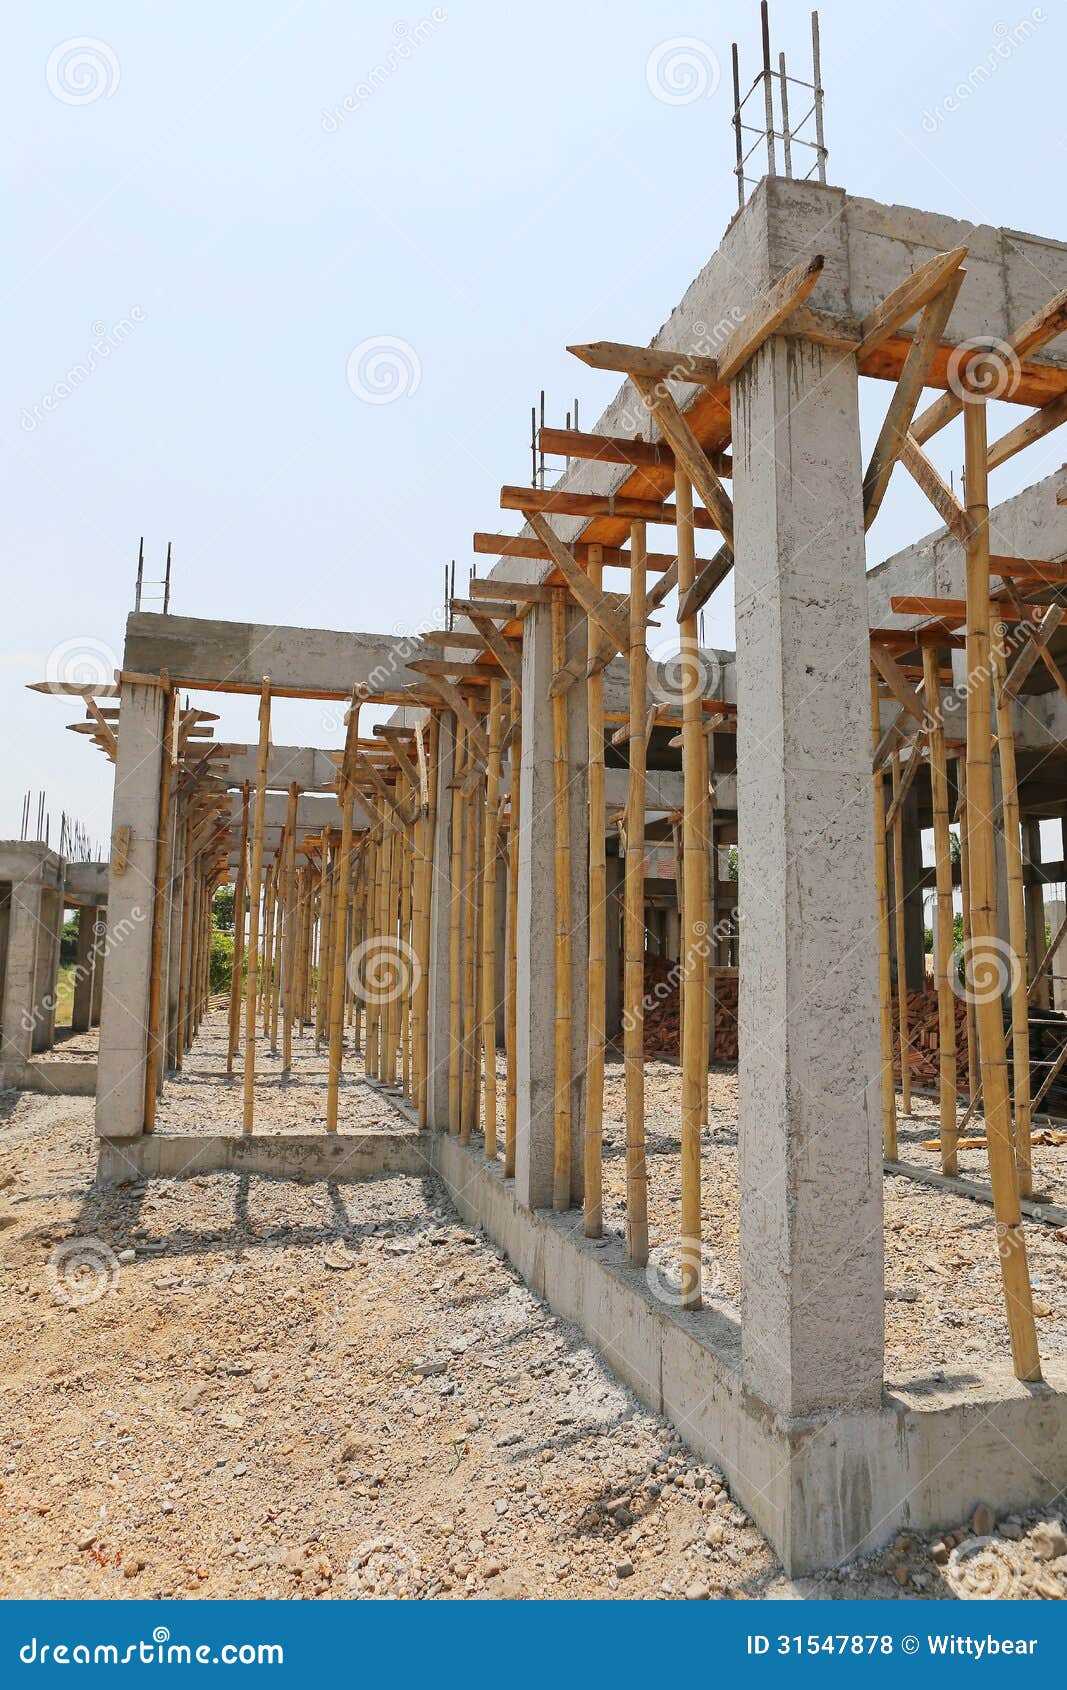 Cement Pillar and Wood in Construct Site Stock Photo - Image of